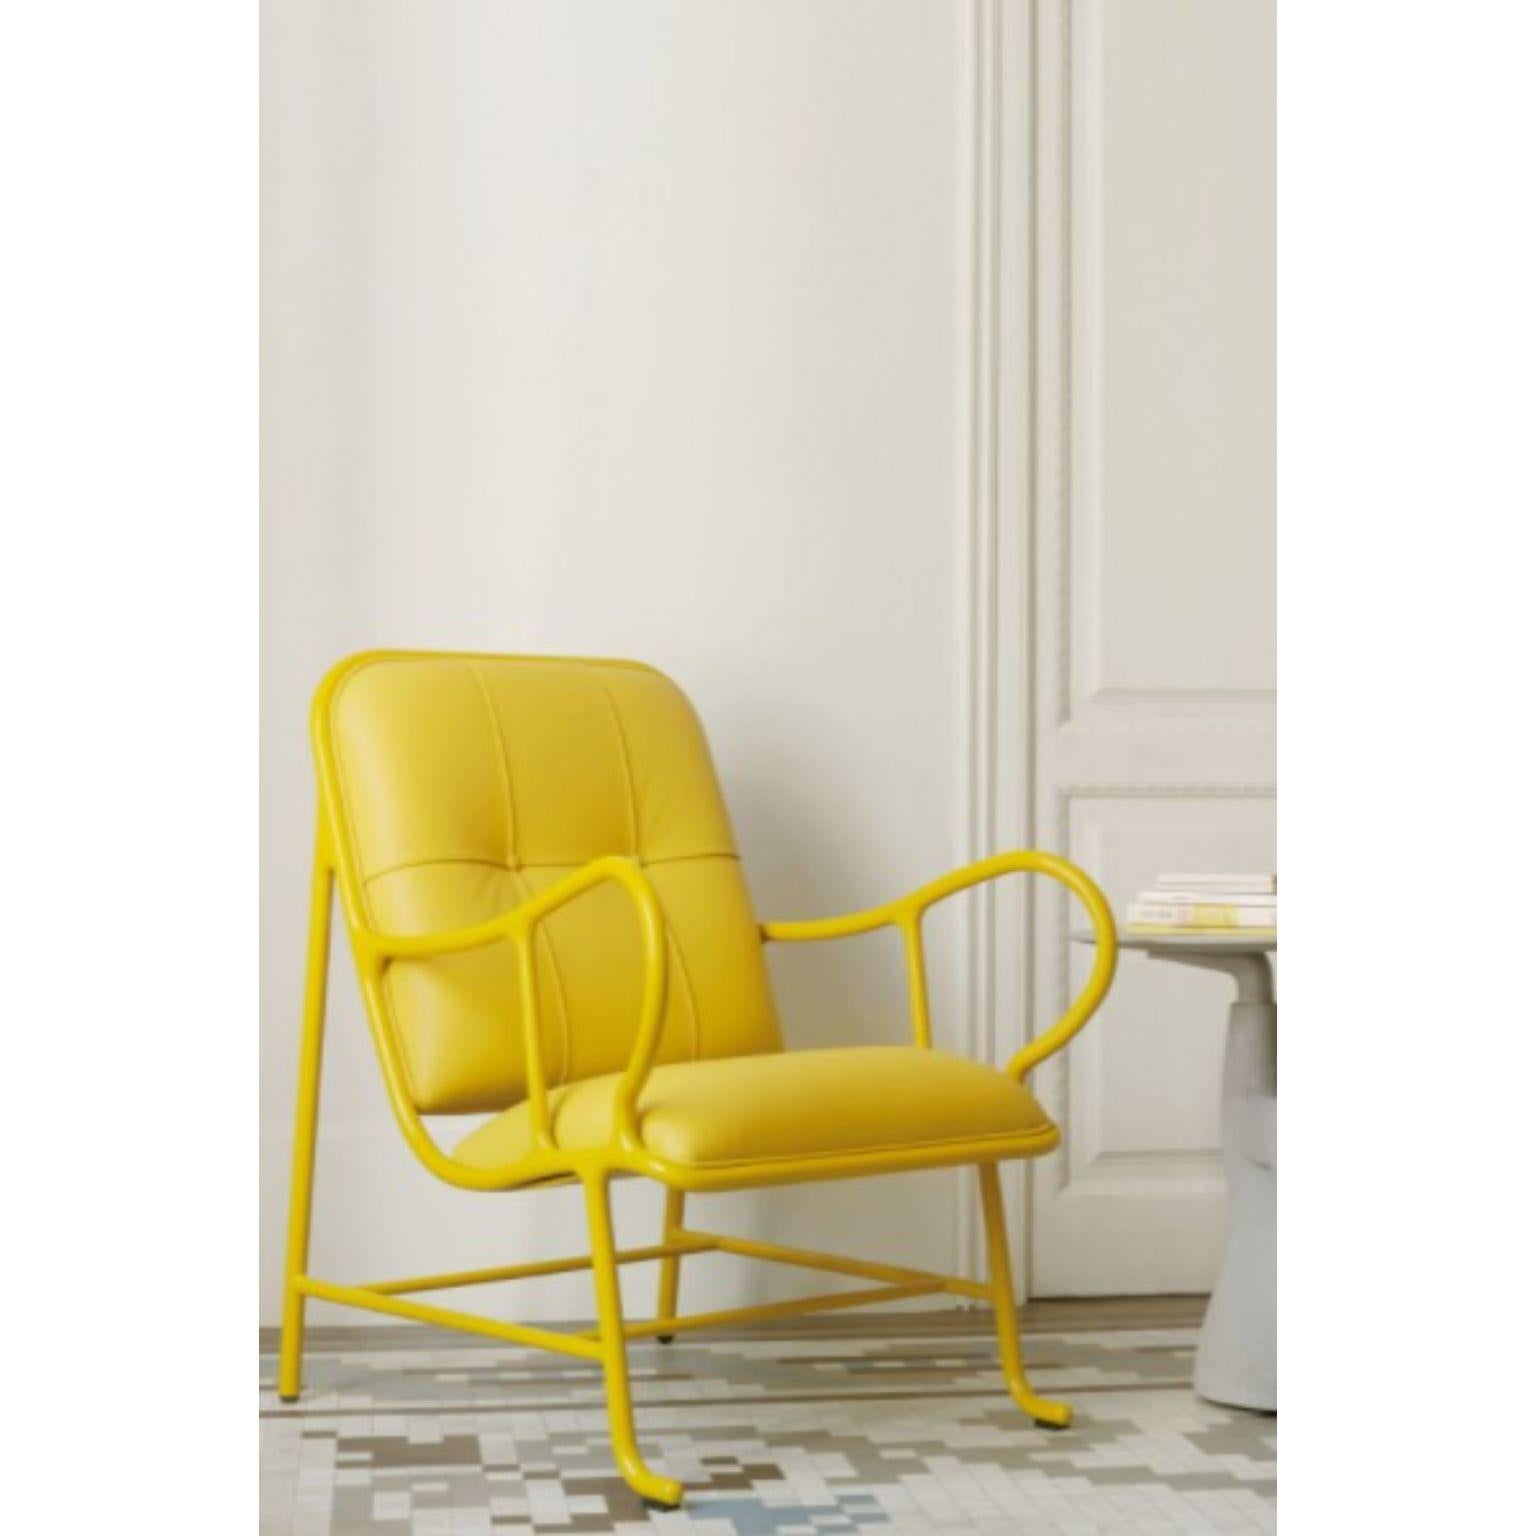 Indoor Gardenia Yello armchair by Jaime Hayon 
Dimensions: D 89 x W 70 x H 100 cm 
Materials: structure in cast aluminum and laminates in extruded aluminum. Powder coating in Alesta Anodic Black or in high-gloss yellow (RAL 1005). Monochrome